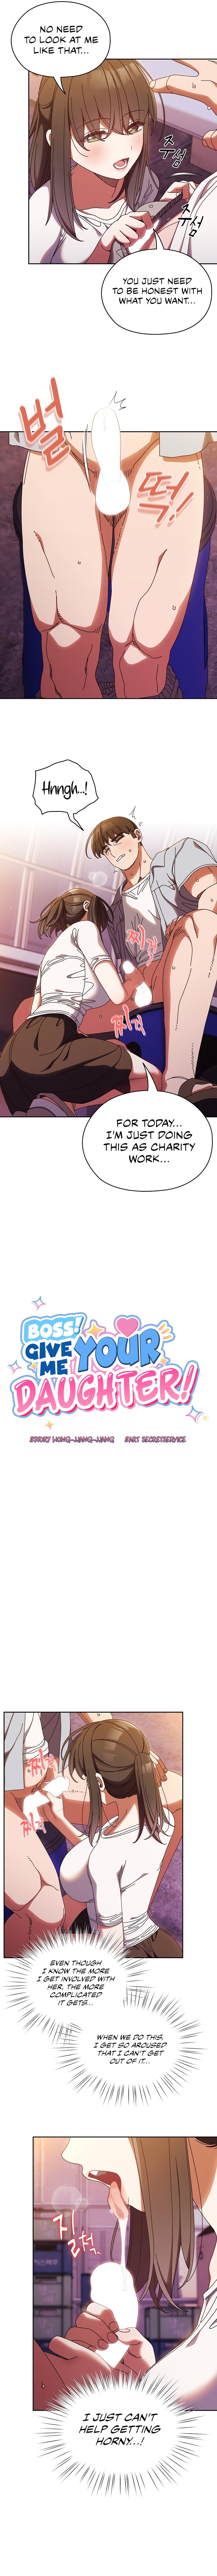 Boss! Give me your daughter! - Chapter 32 Page 4